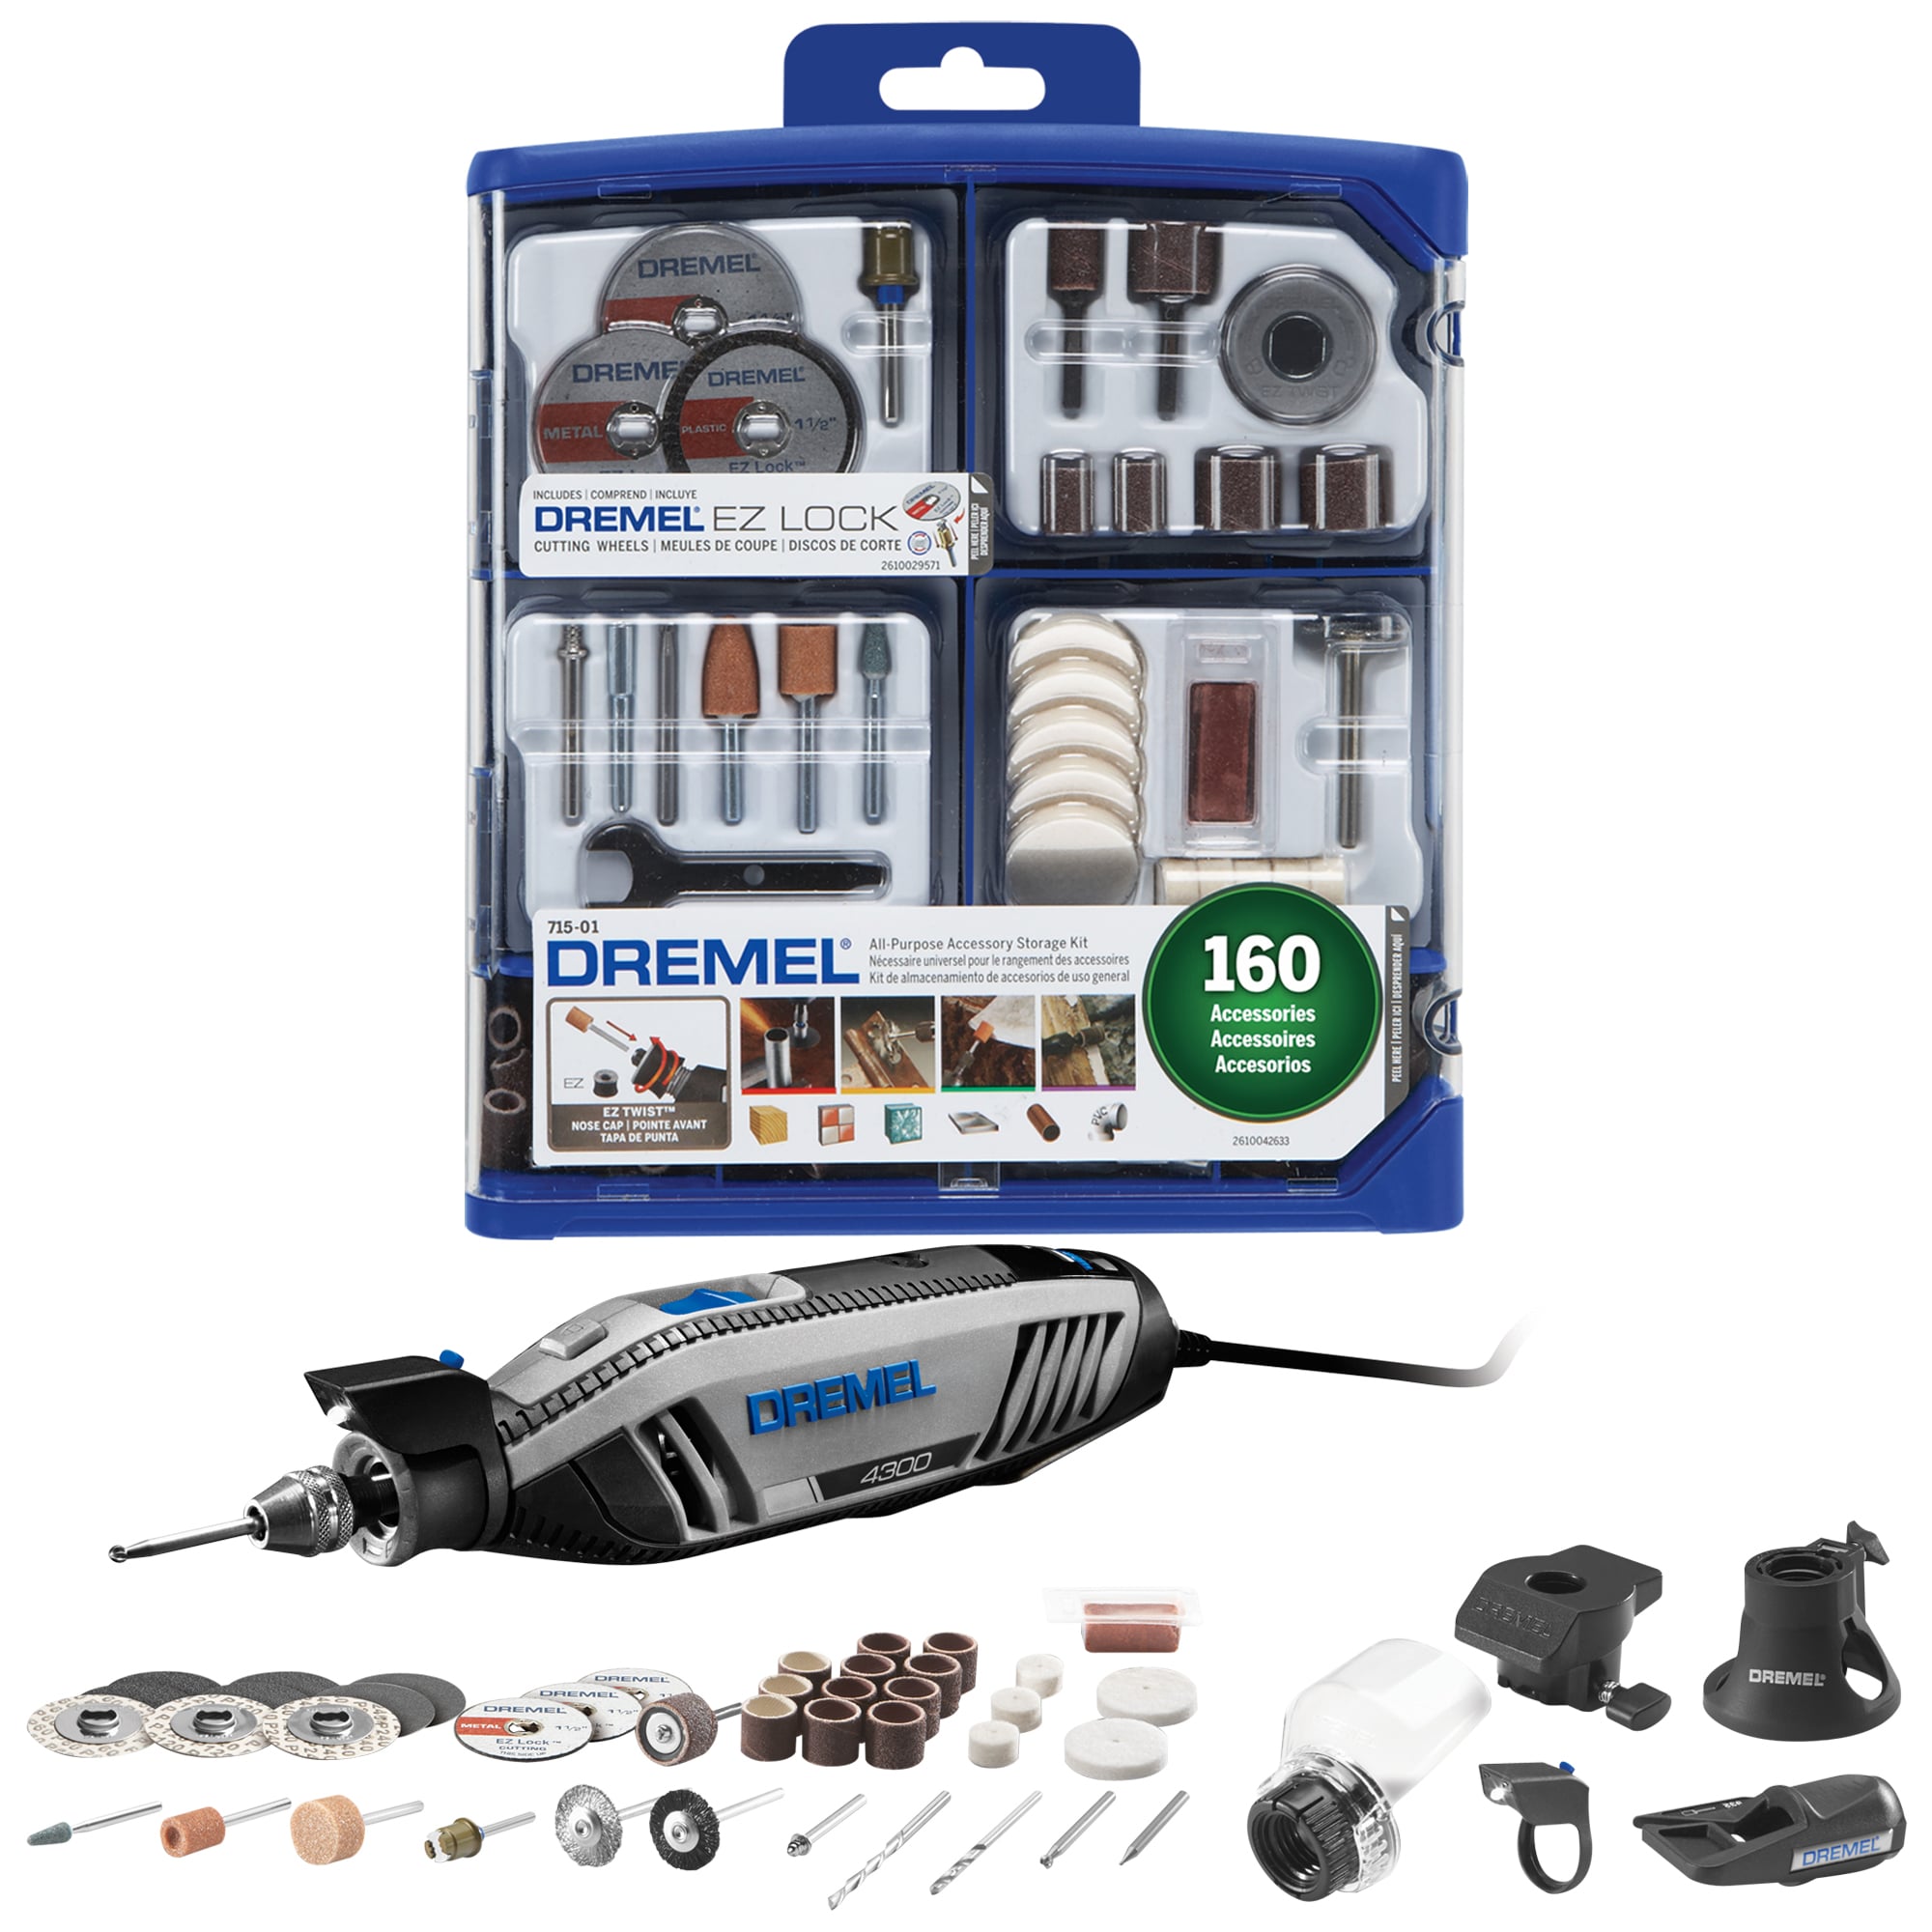 Dremel 4300 Corded Variable Speed Rotary Tool with 5 Attachments and 40  Accessories + Flex Shaft Attachment